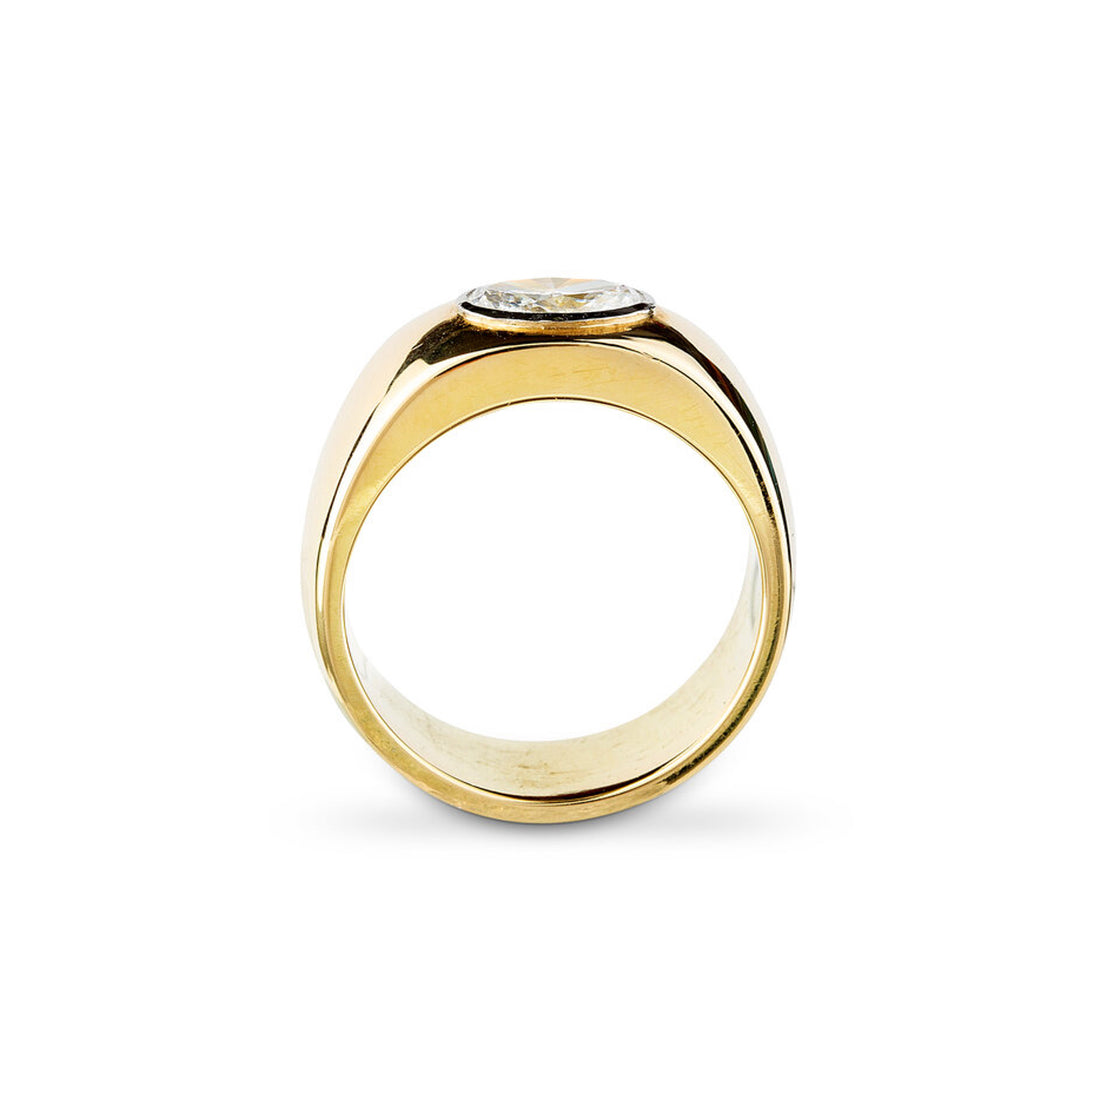  Wide Ring with Oval Diamond by Jessie Thomas | The Cut London